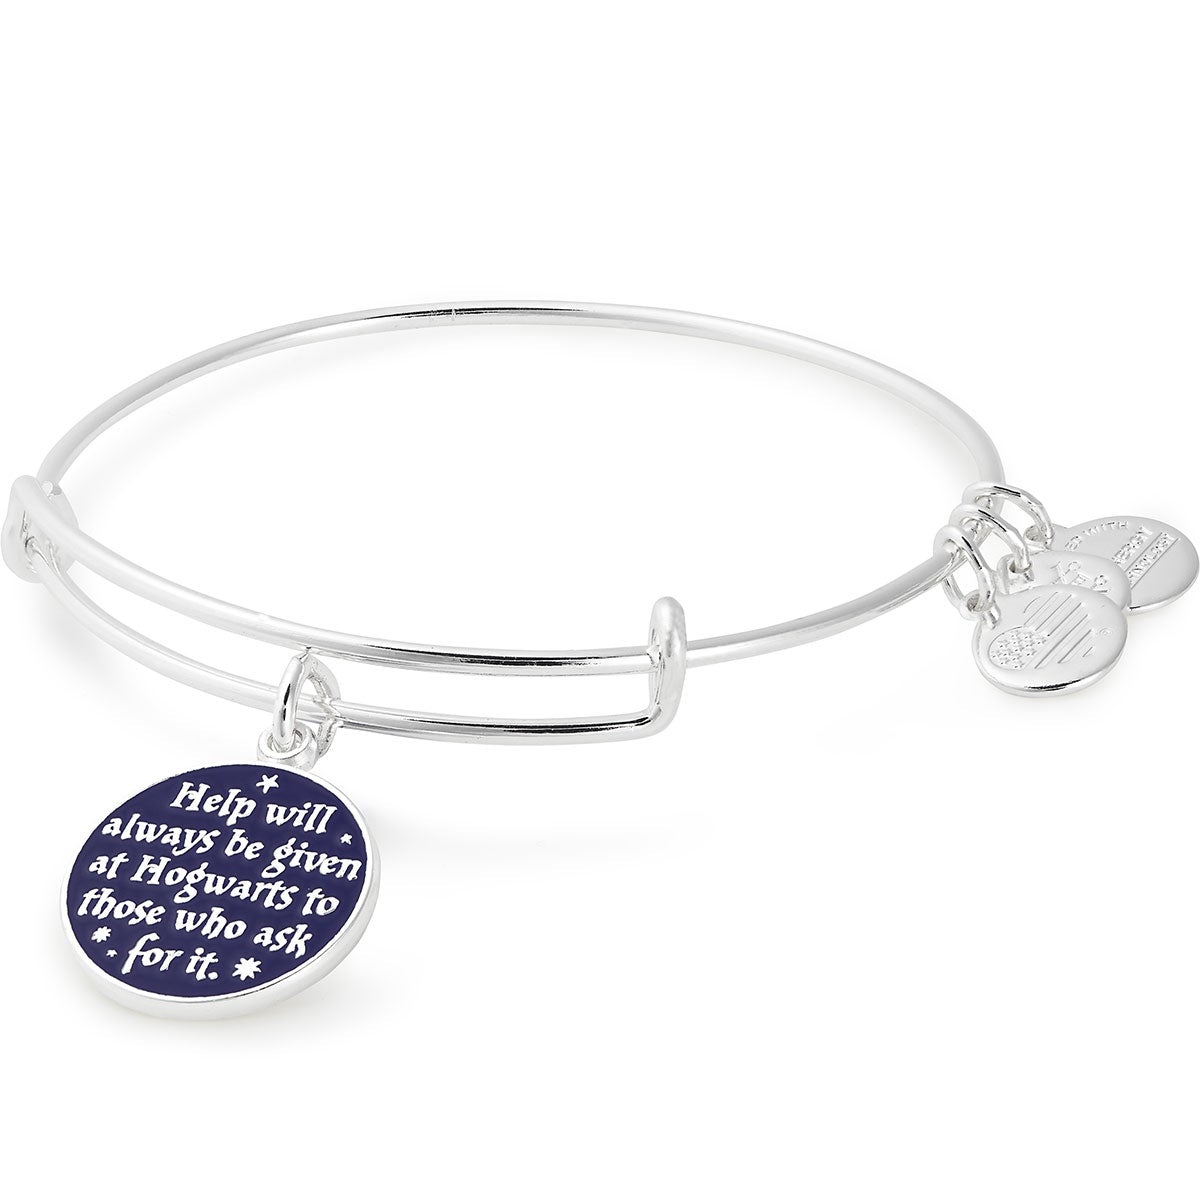 Harry Potter™ 'Help Will Always Be Given' Charm Bangle